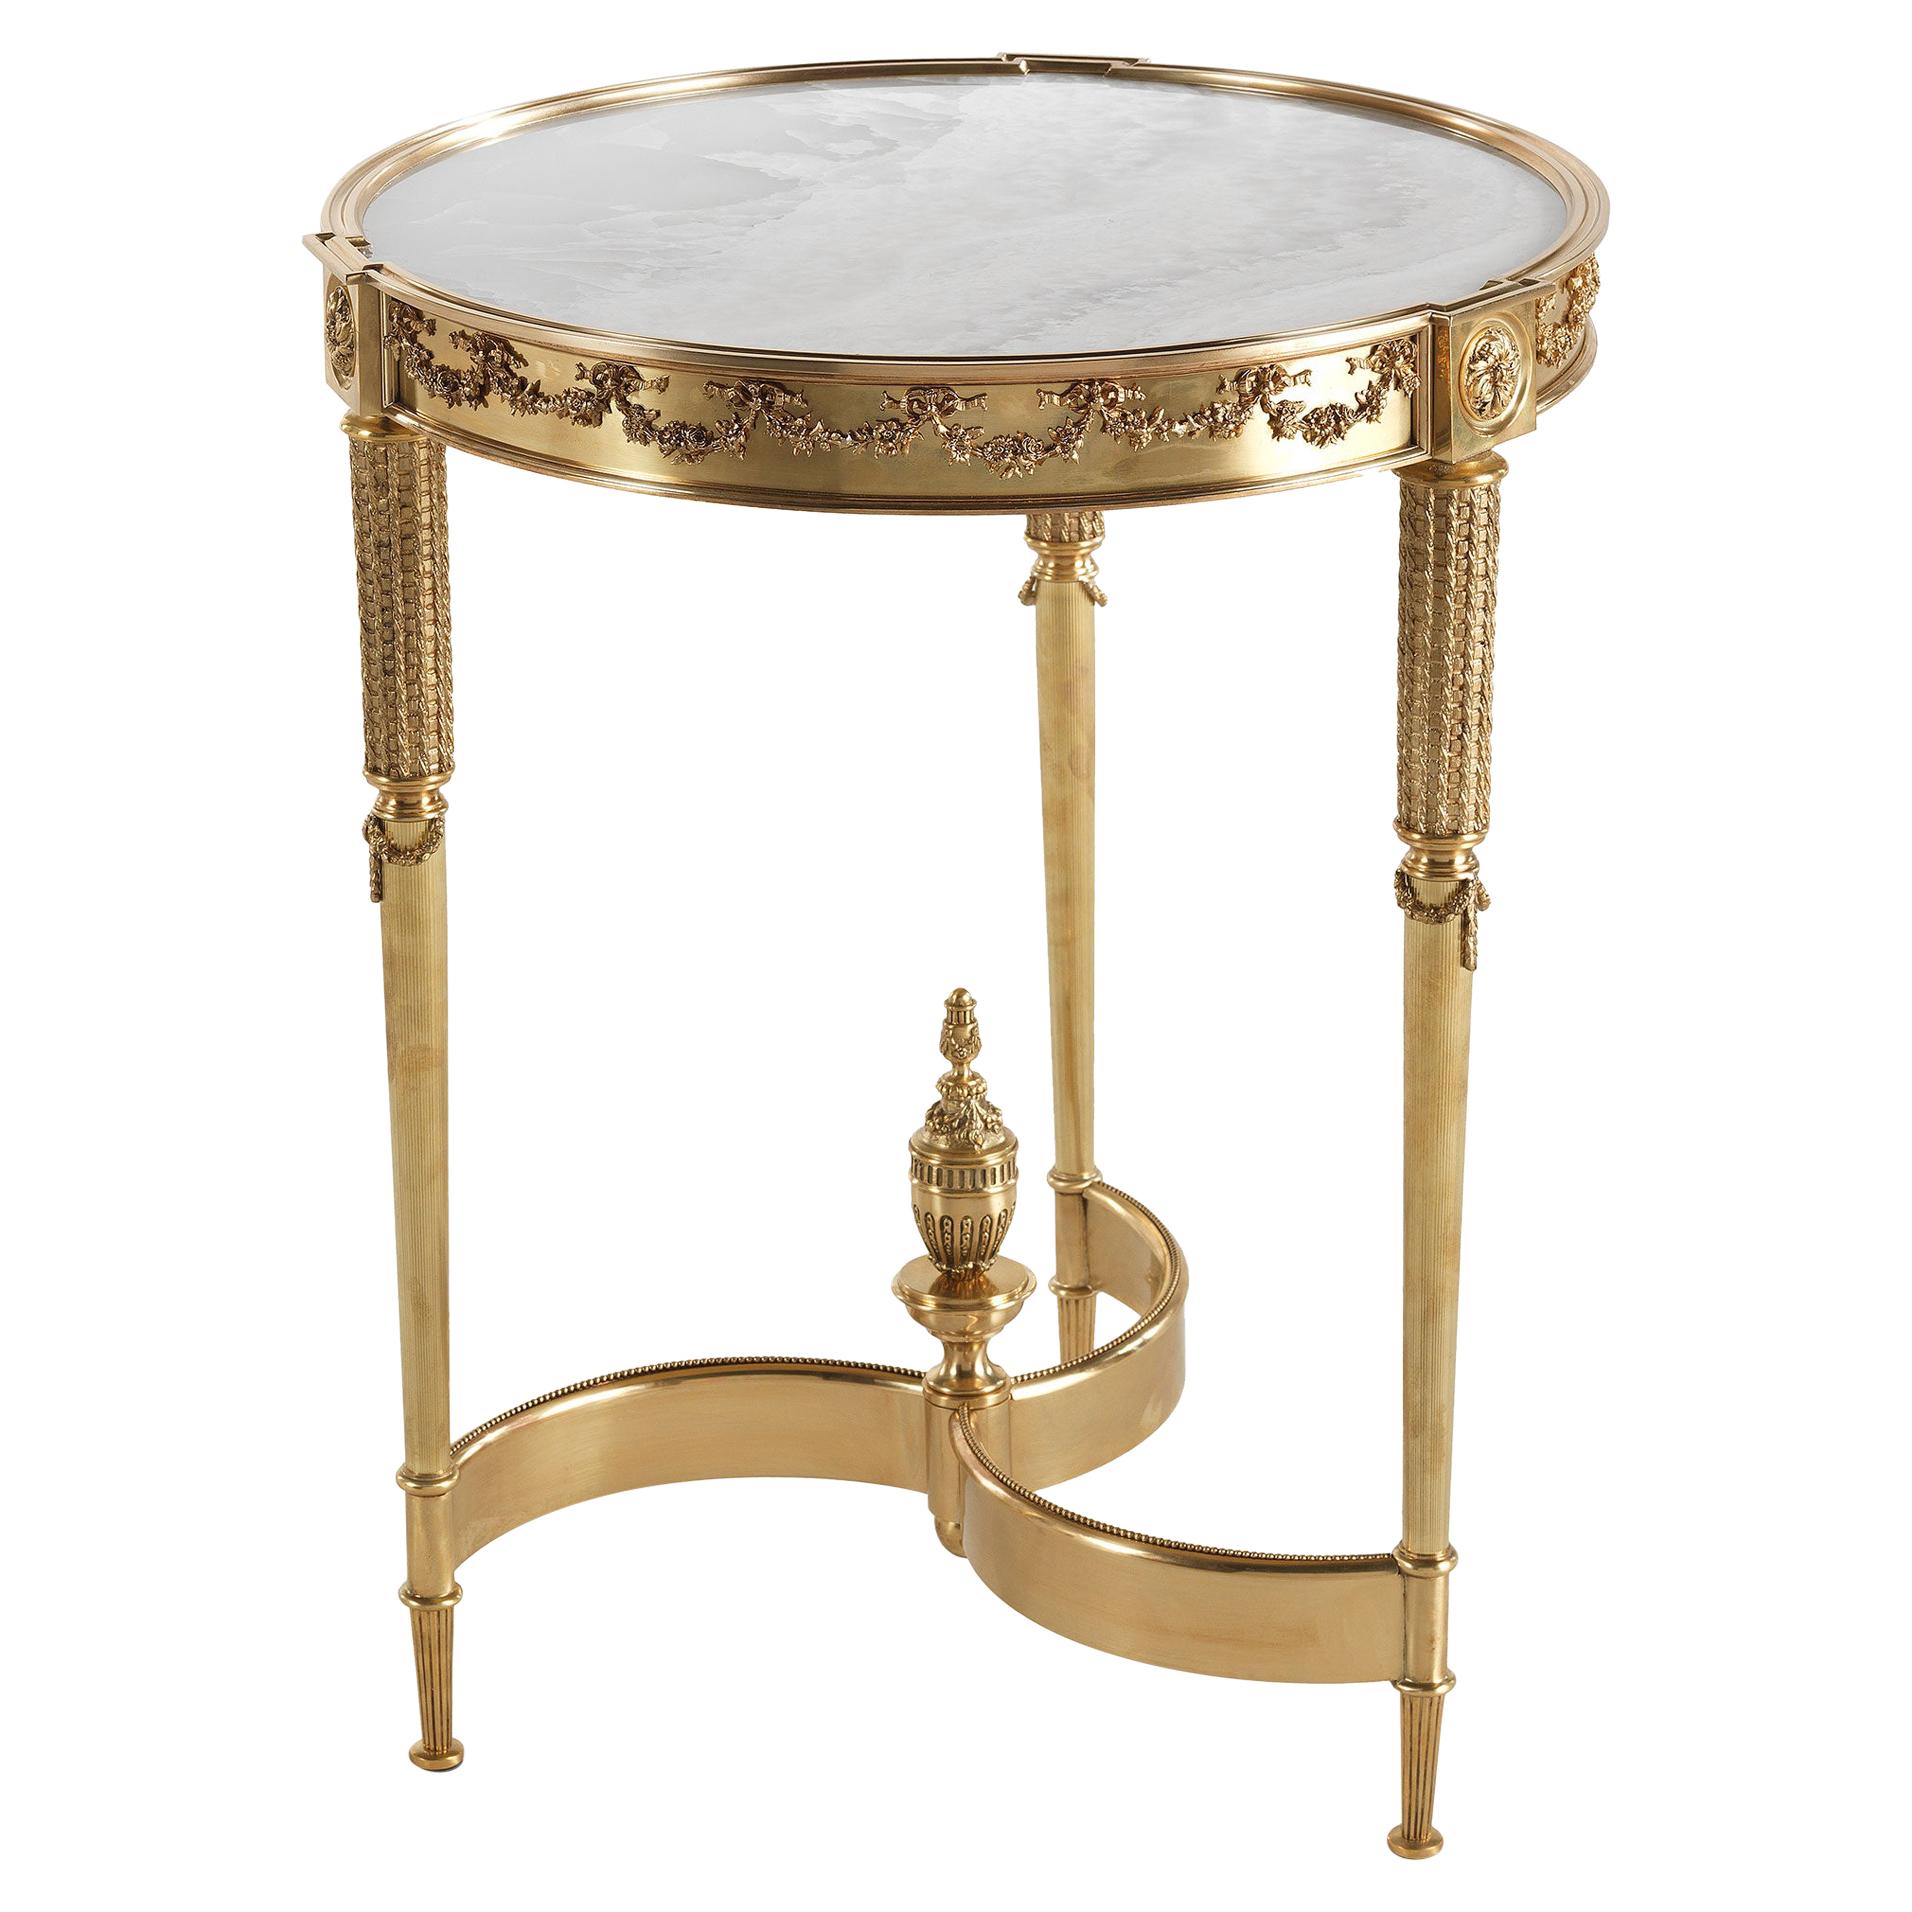 21st Century Pleasure Side Table in Brass and White Namibia Rhino Marble Top For Sale